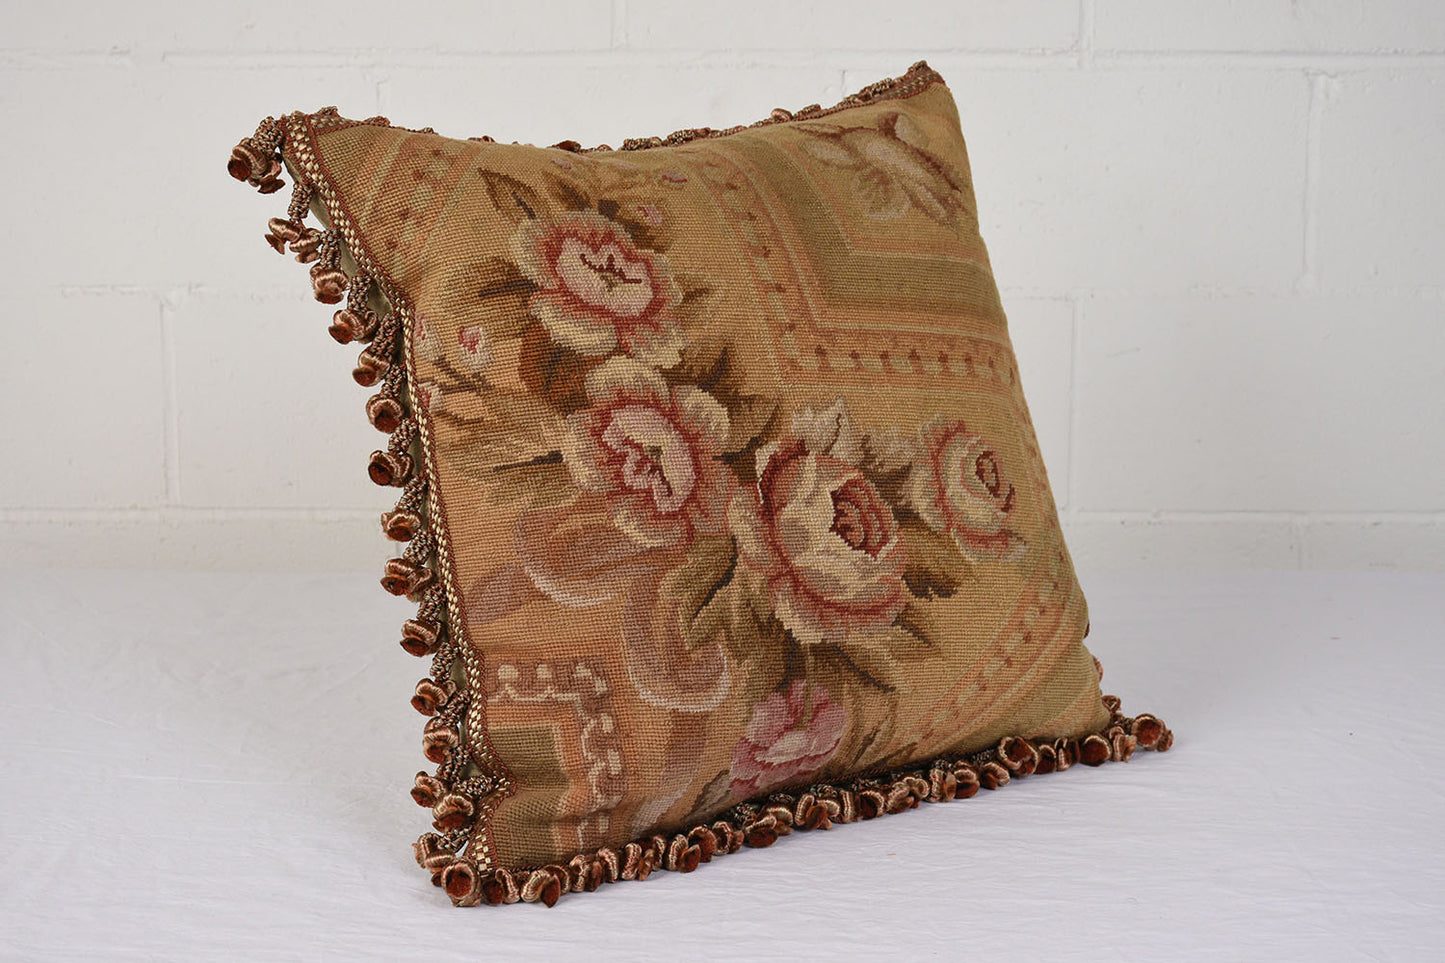 Antique French Textile Pillows with Floral Pattern & Silk Tassels